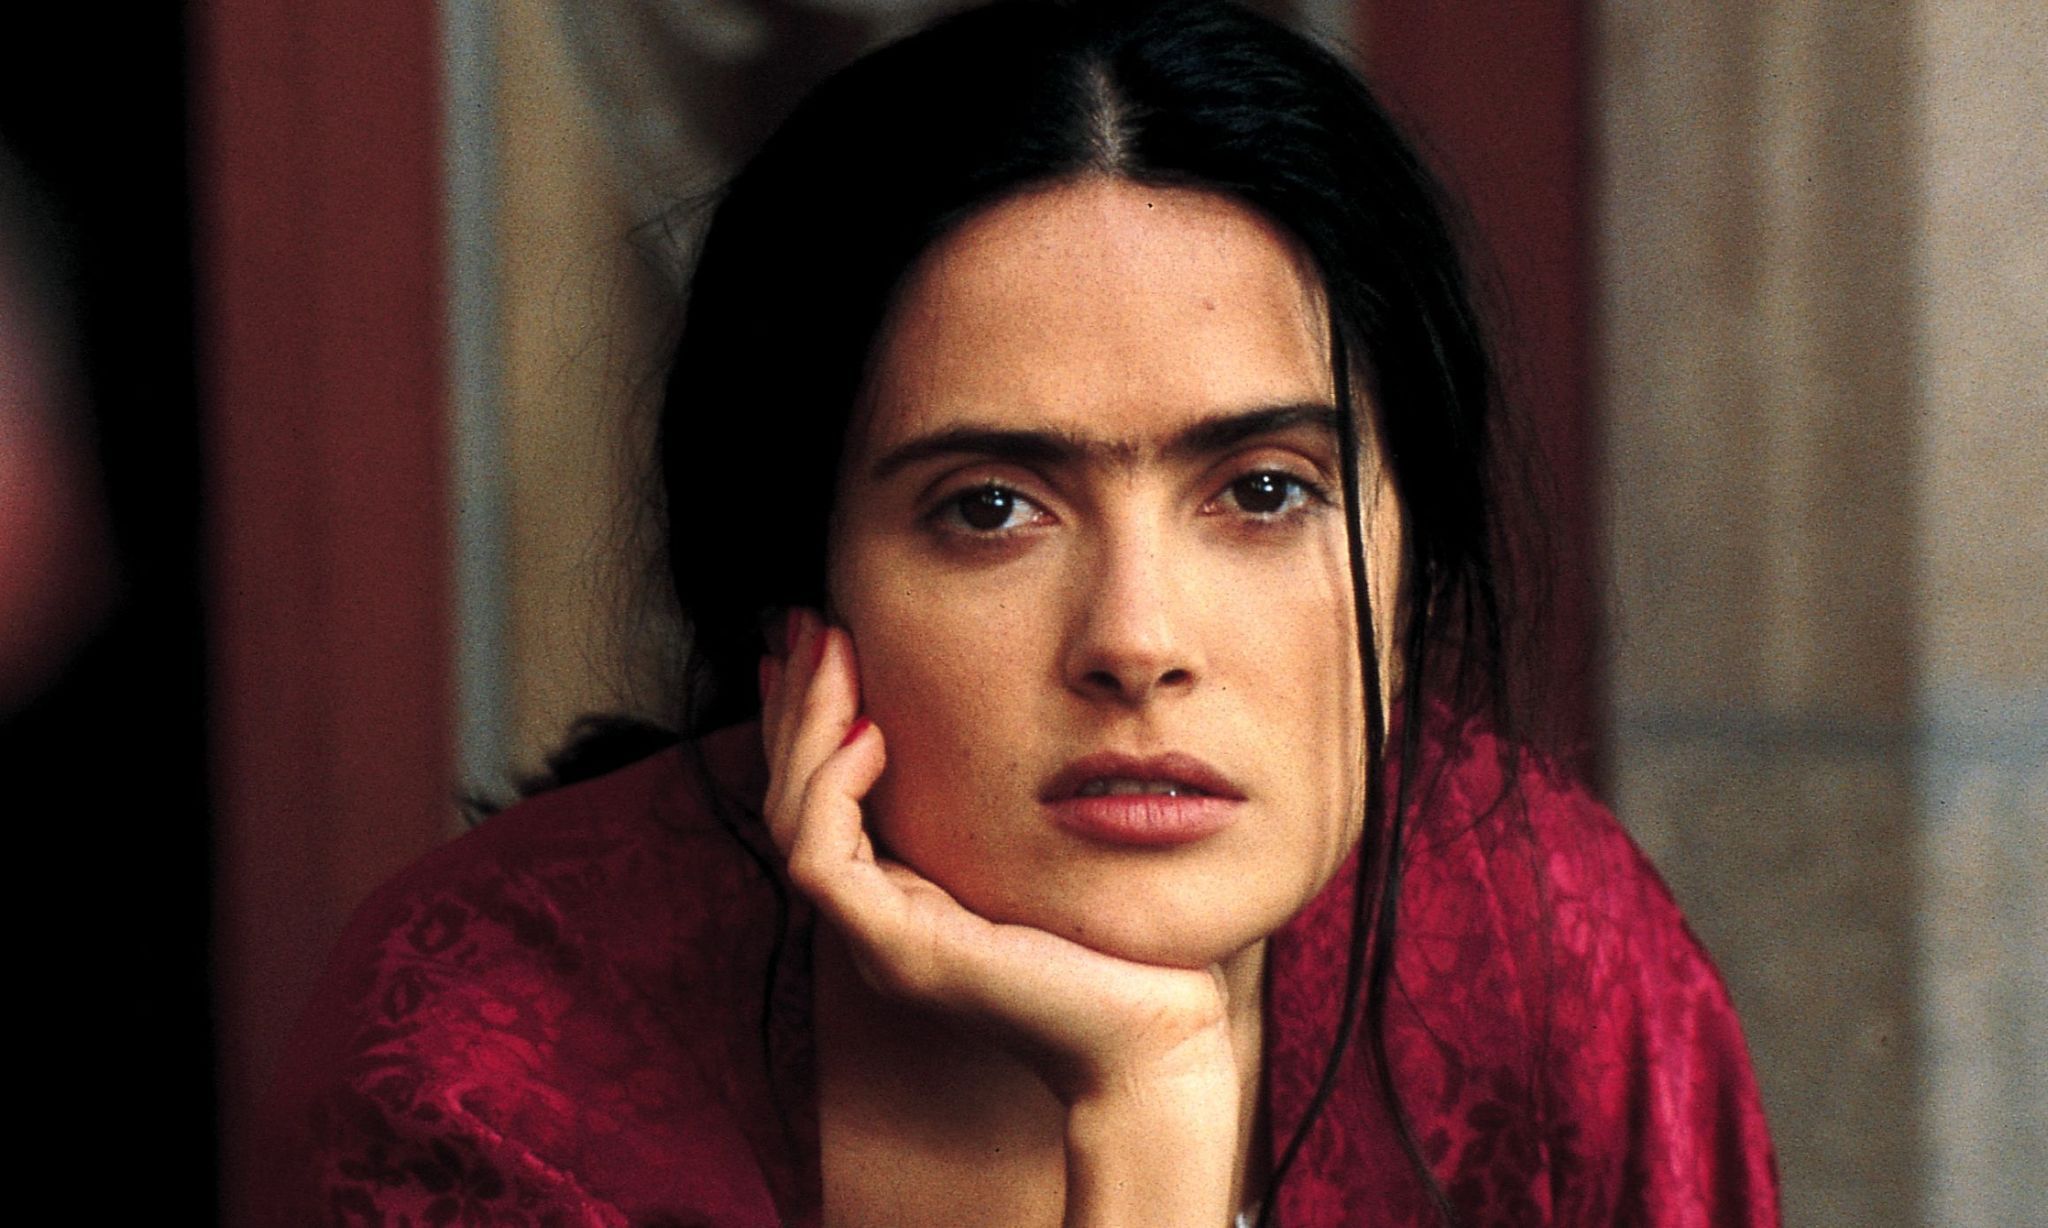 Woman (looks like Frida Kahlo) looks at camera with hand propped under chin.